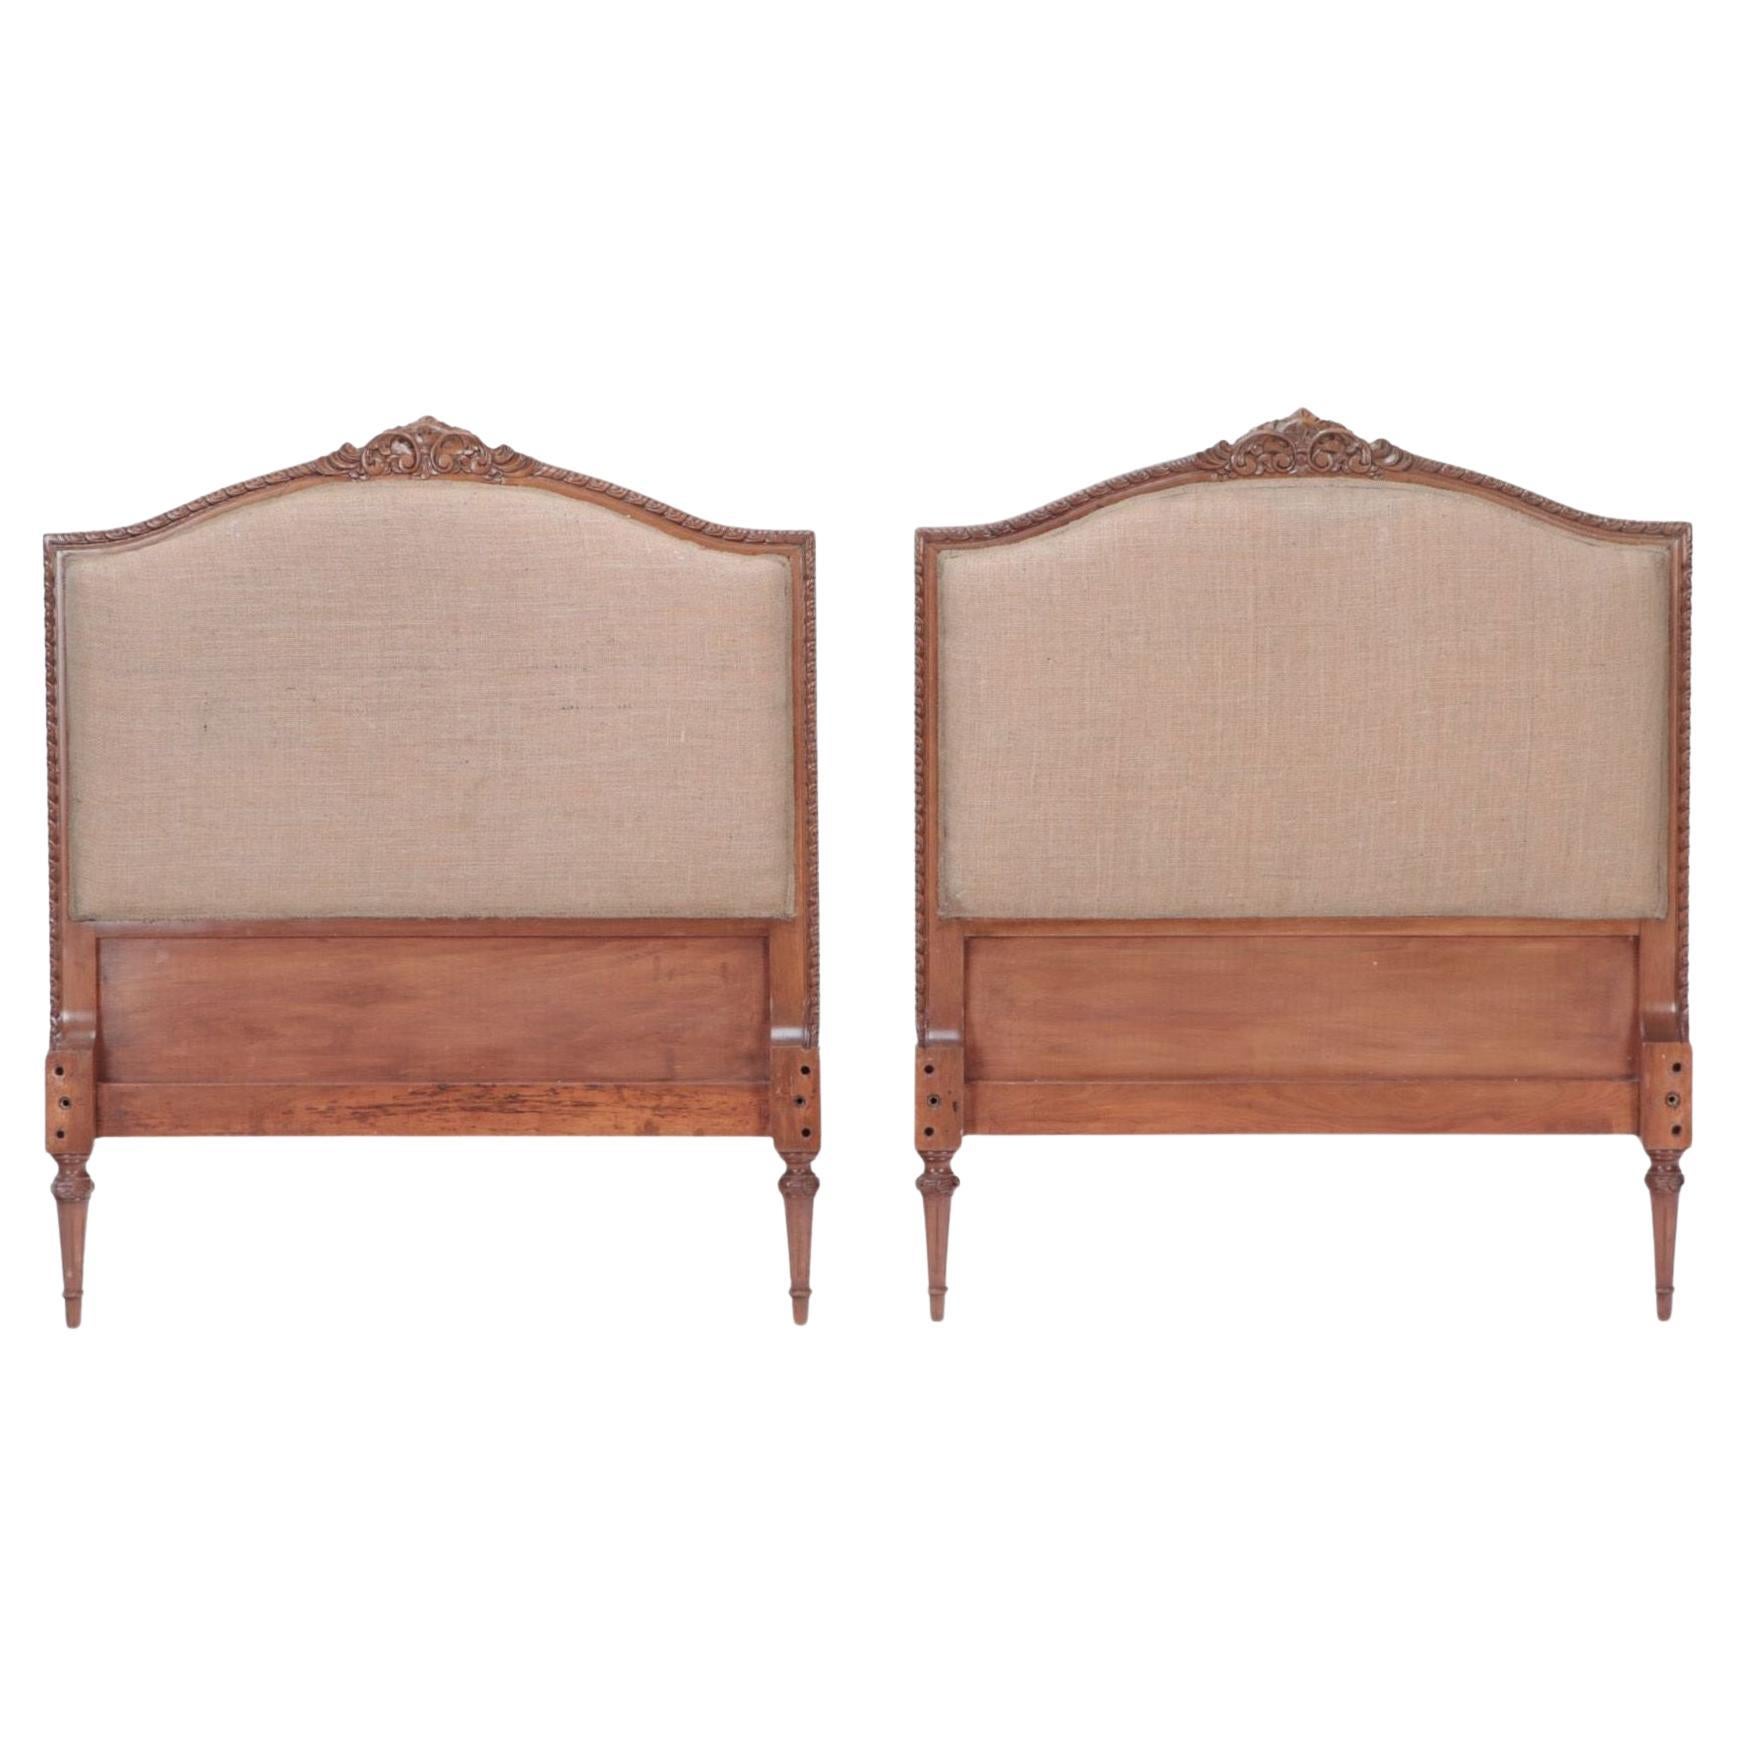 Pair of French Louis XVI Style Twin Beds Headboards in Burlap, circa 1950